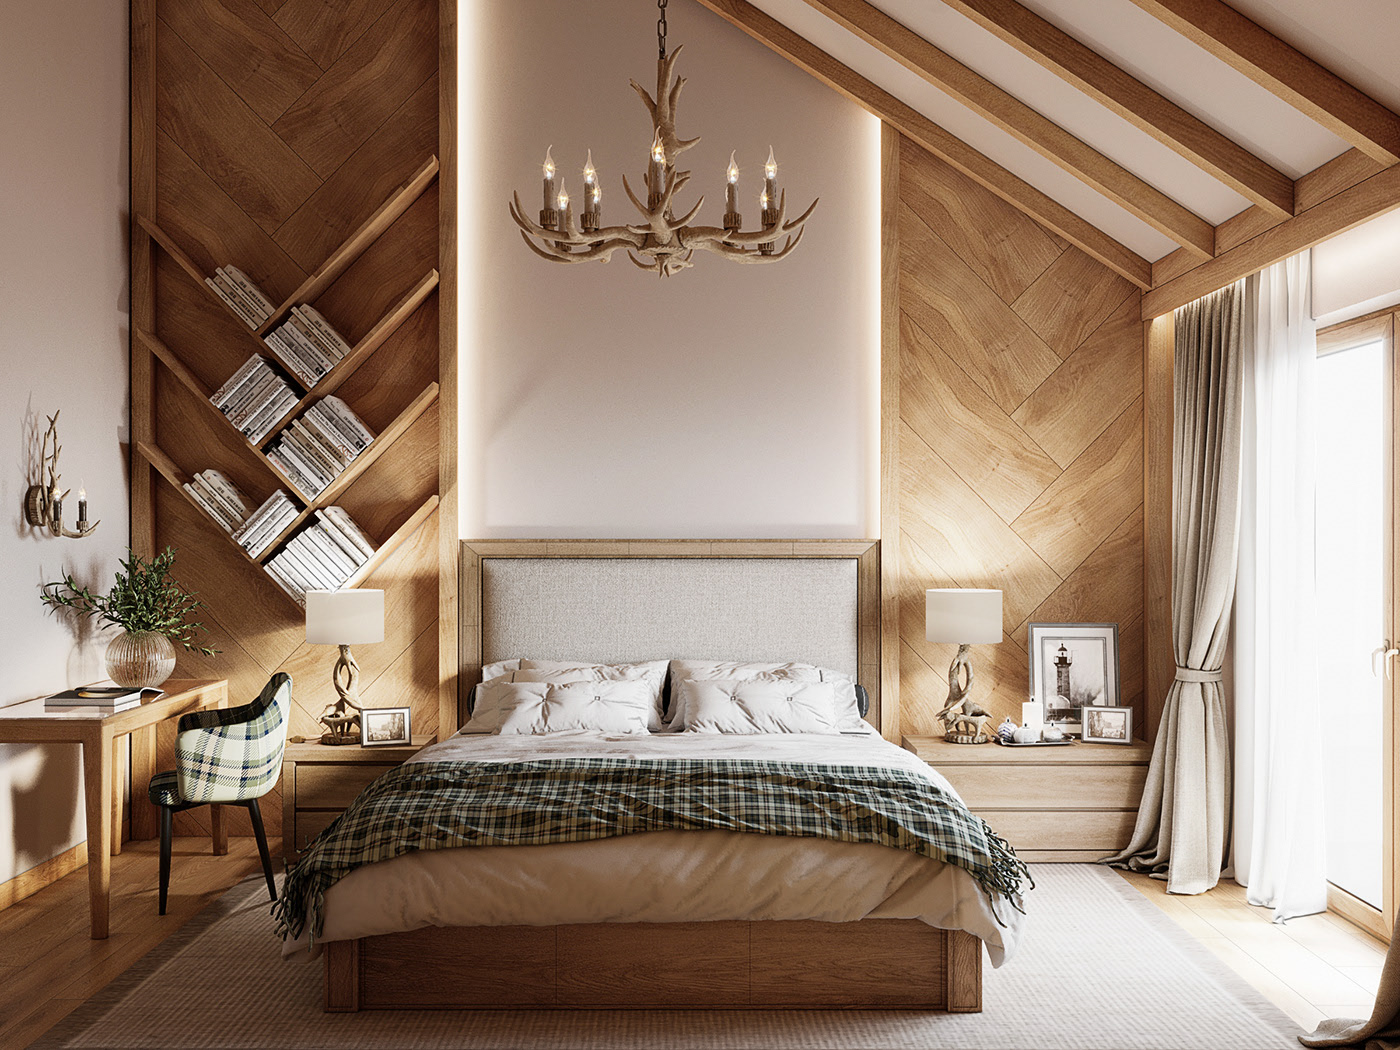 A typical warm room with wood as the main material, its design is preferred in Nordic countries where the climate is cold. It is a good idea to reduce the cold with sunlight from the window.